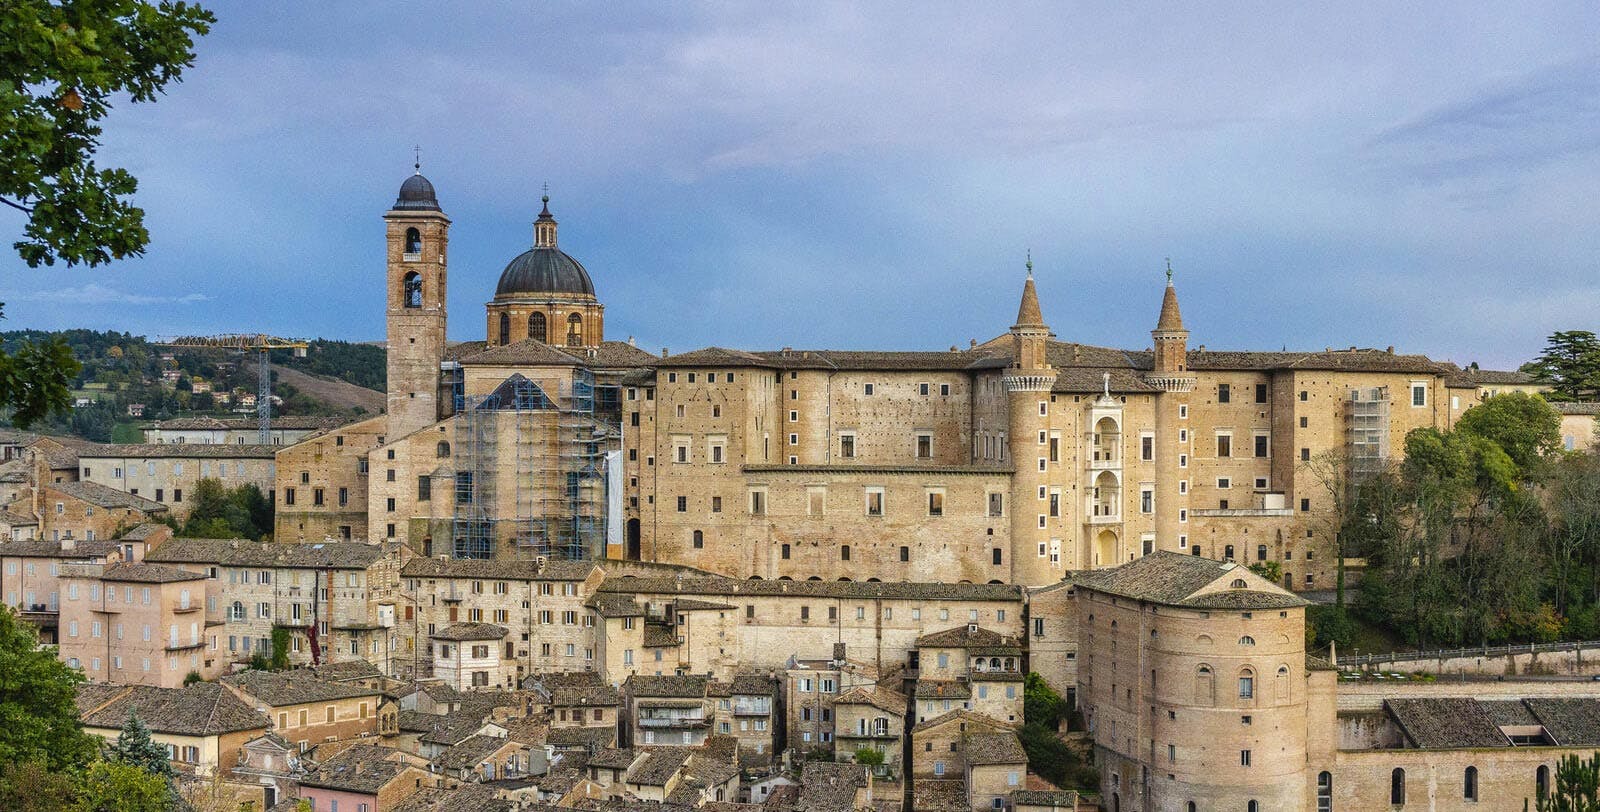 Traditional town in Le Marche with domed church and stone town walls